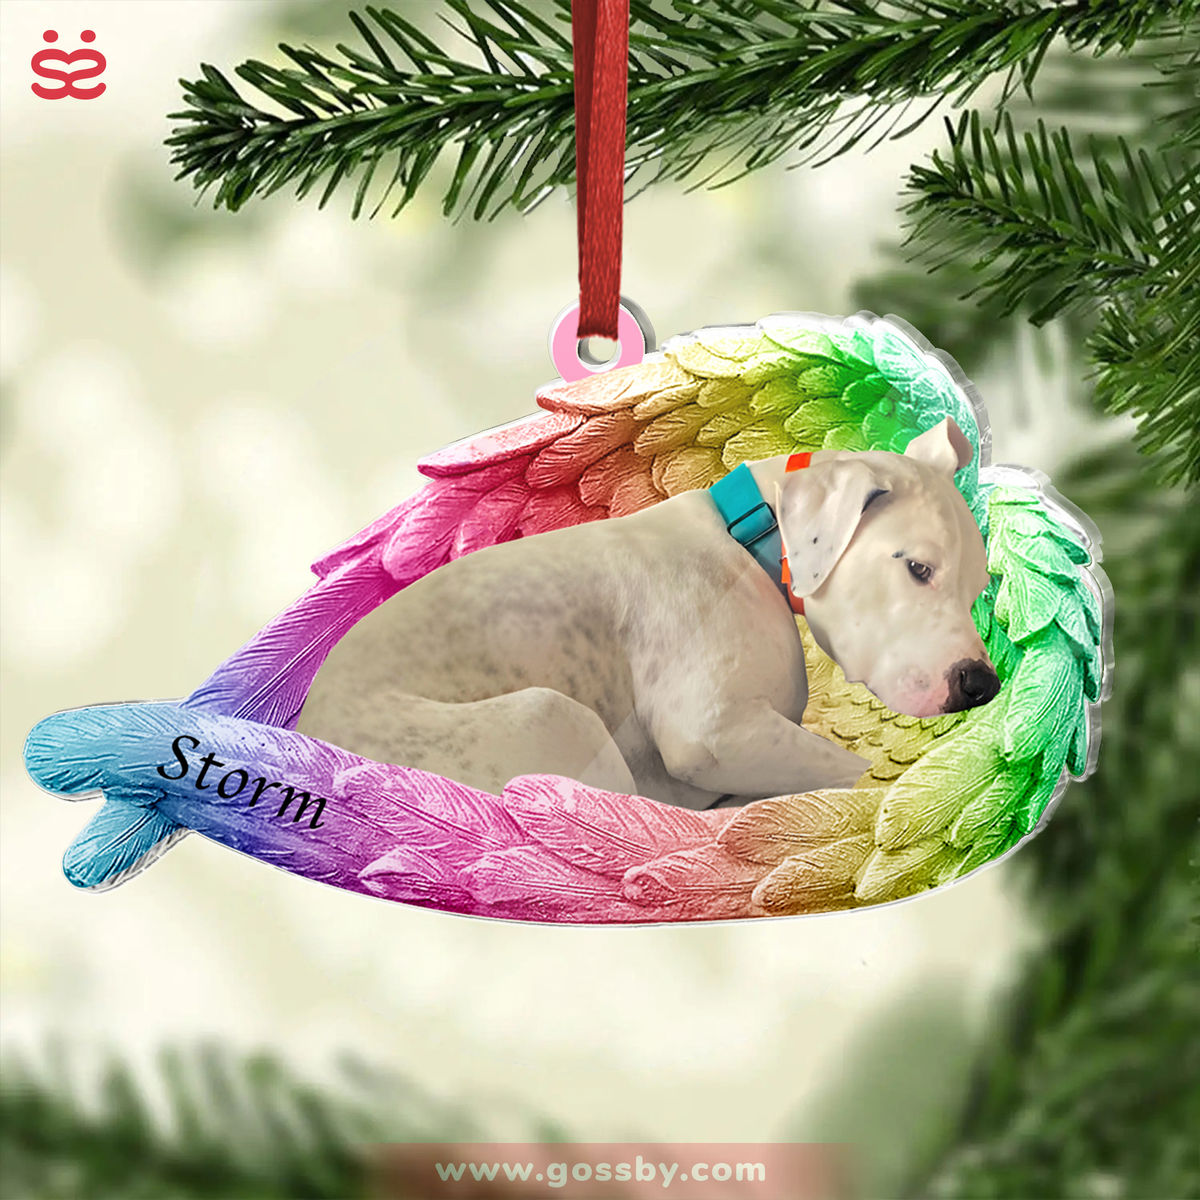 Dog Acrylic Ornament - Dog Lovers - Sleeping Pet Within Angel Wings - Customized Your Photo Ornament, Custom Photo Gifts, Christmas Gifts_5